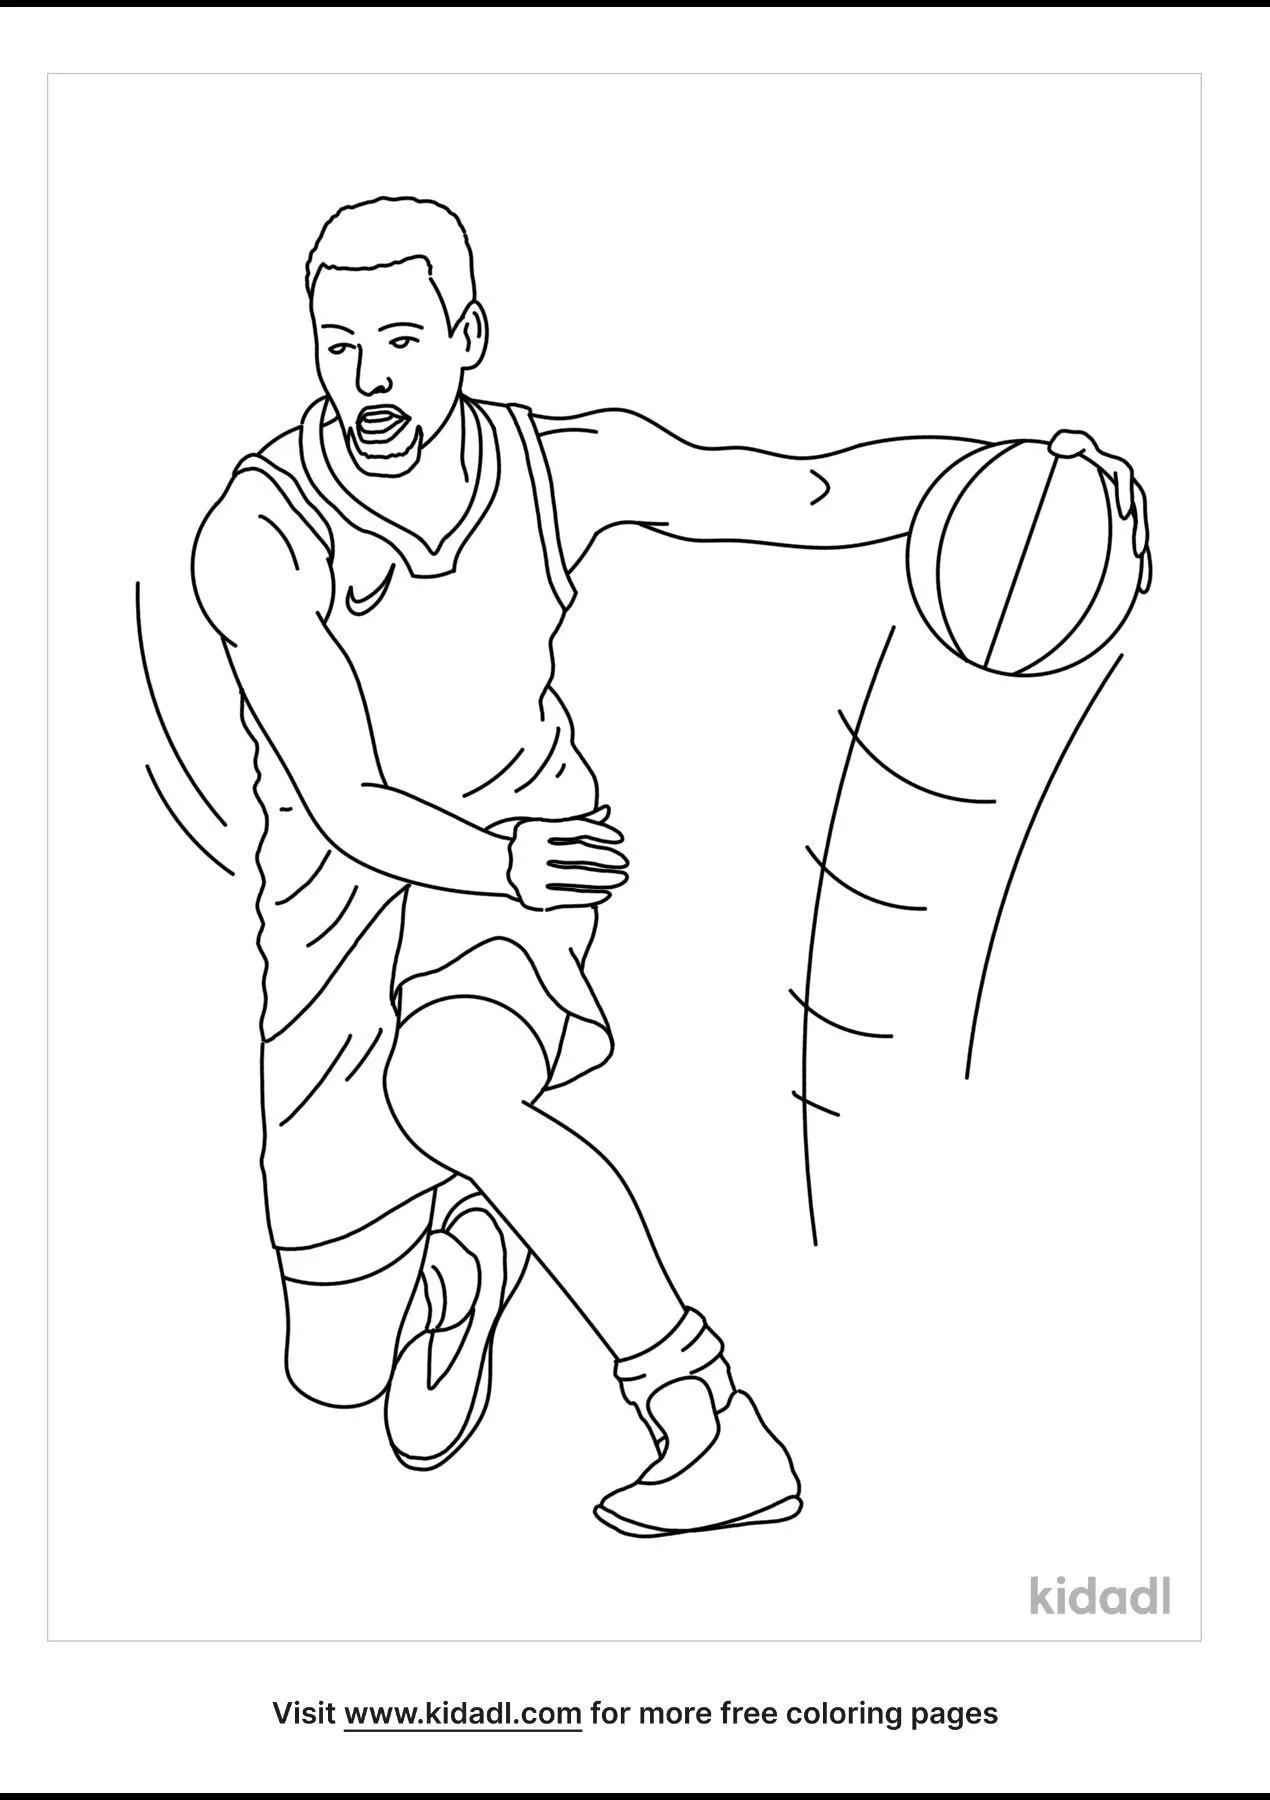 Free stephen curry coloring page coloring page printables